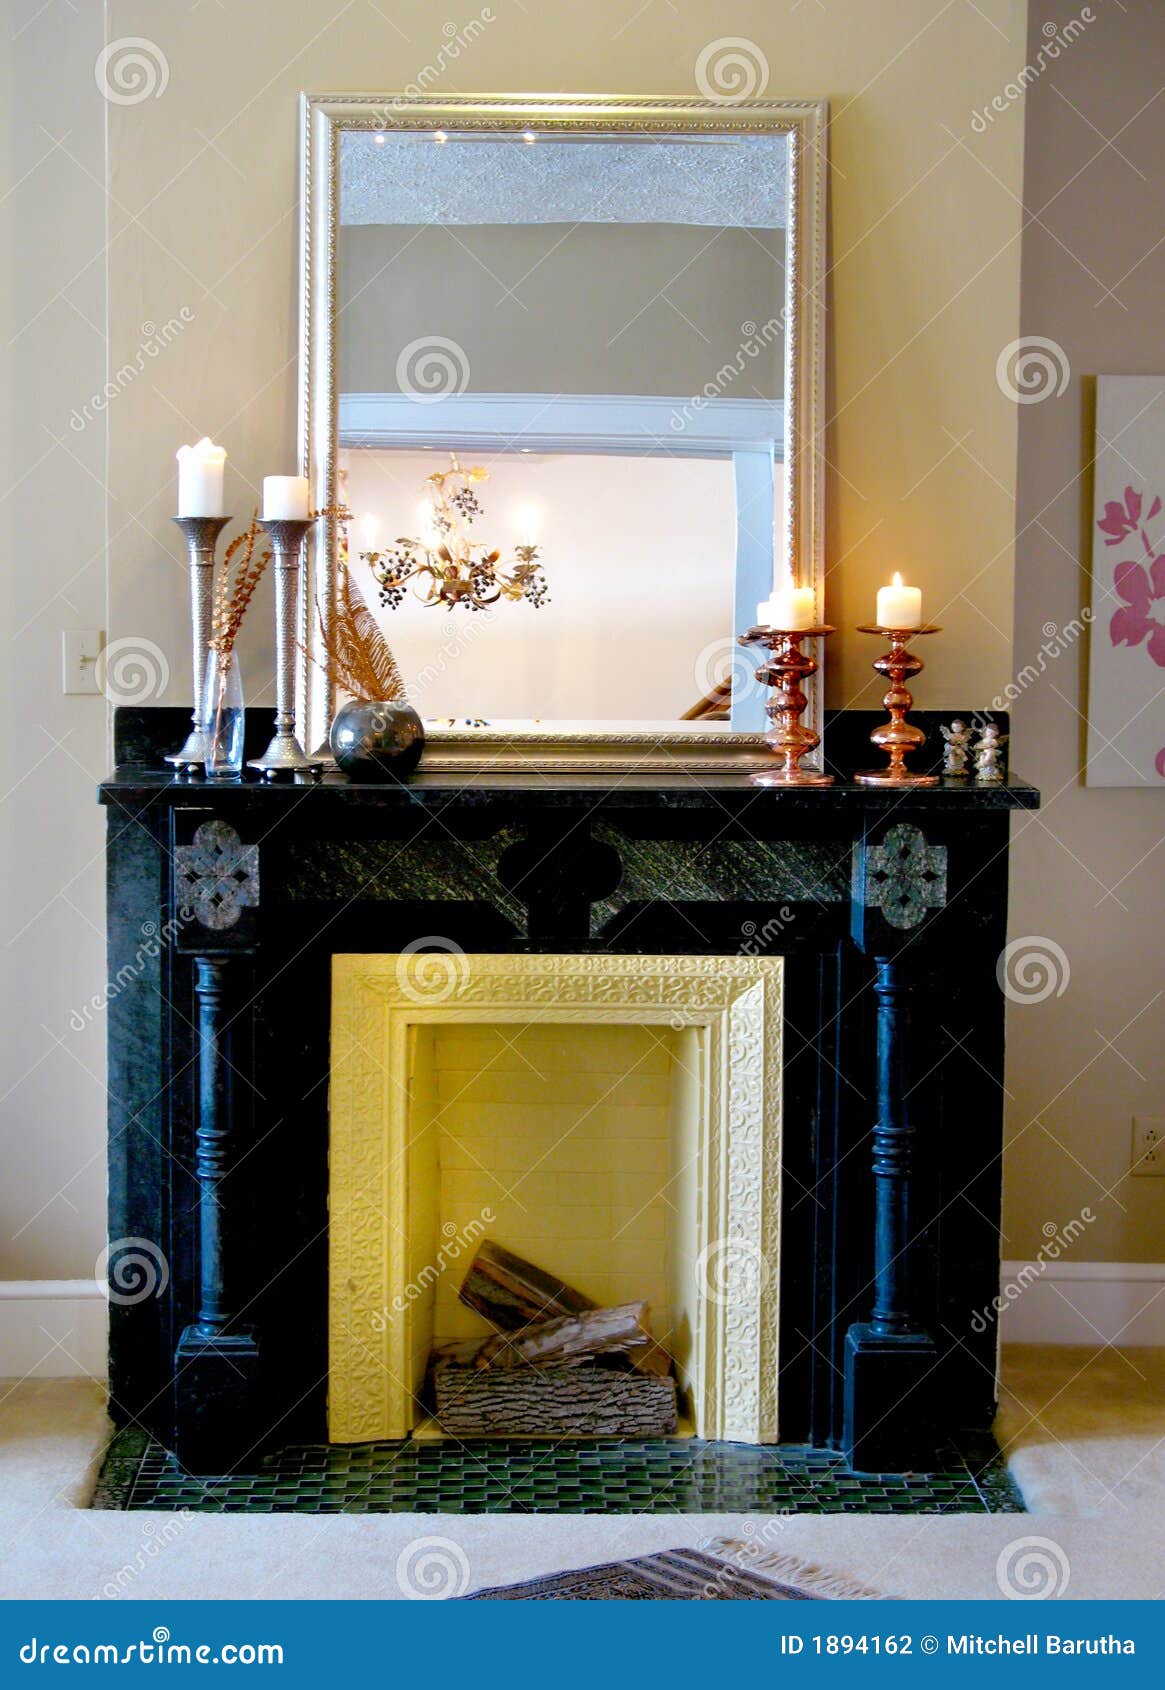 black mantle with mirror & candlesticks